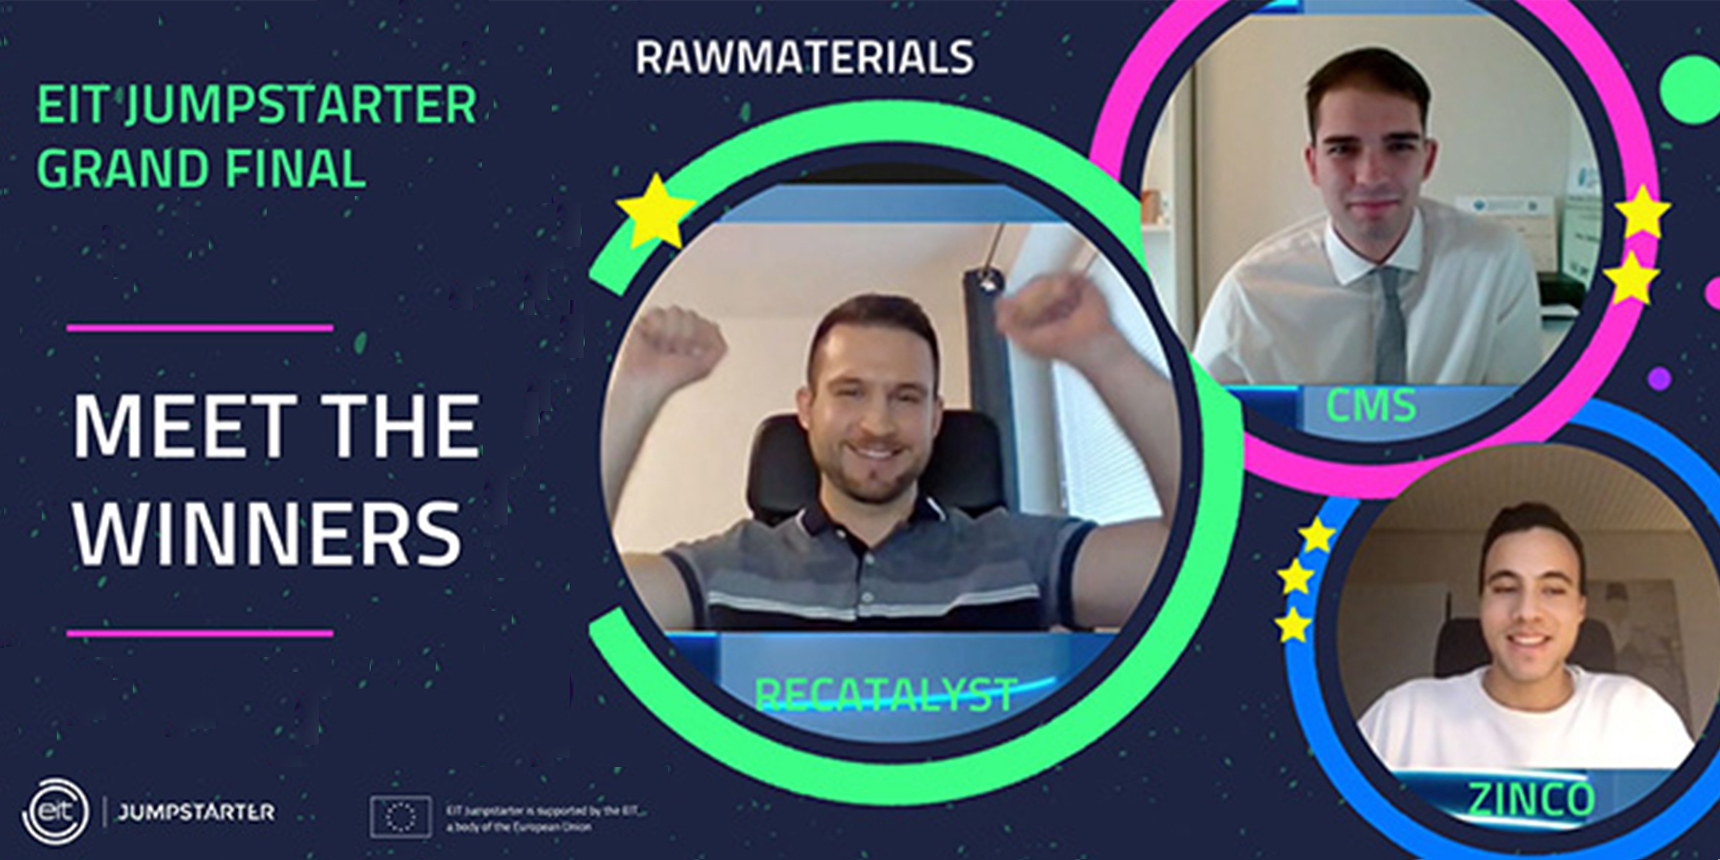 EIT Jumpstarter Grand Final announced top young businesses in the raw materials sector